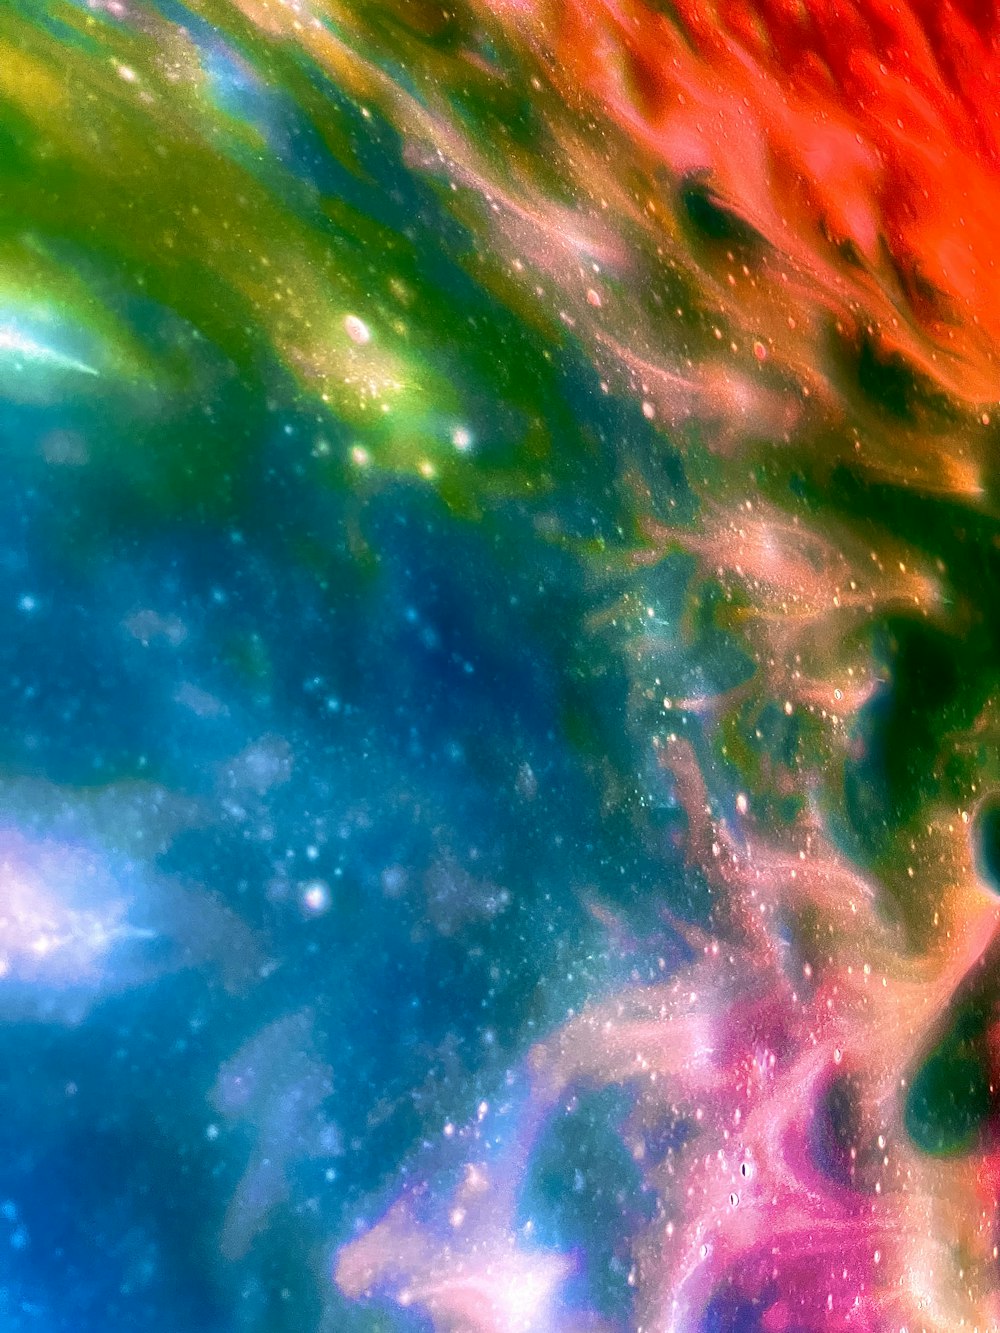 a colorful space filled with stars and dust